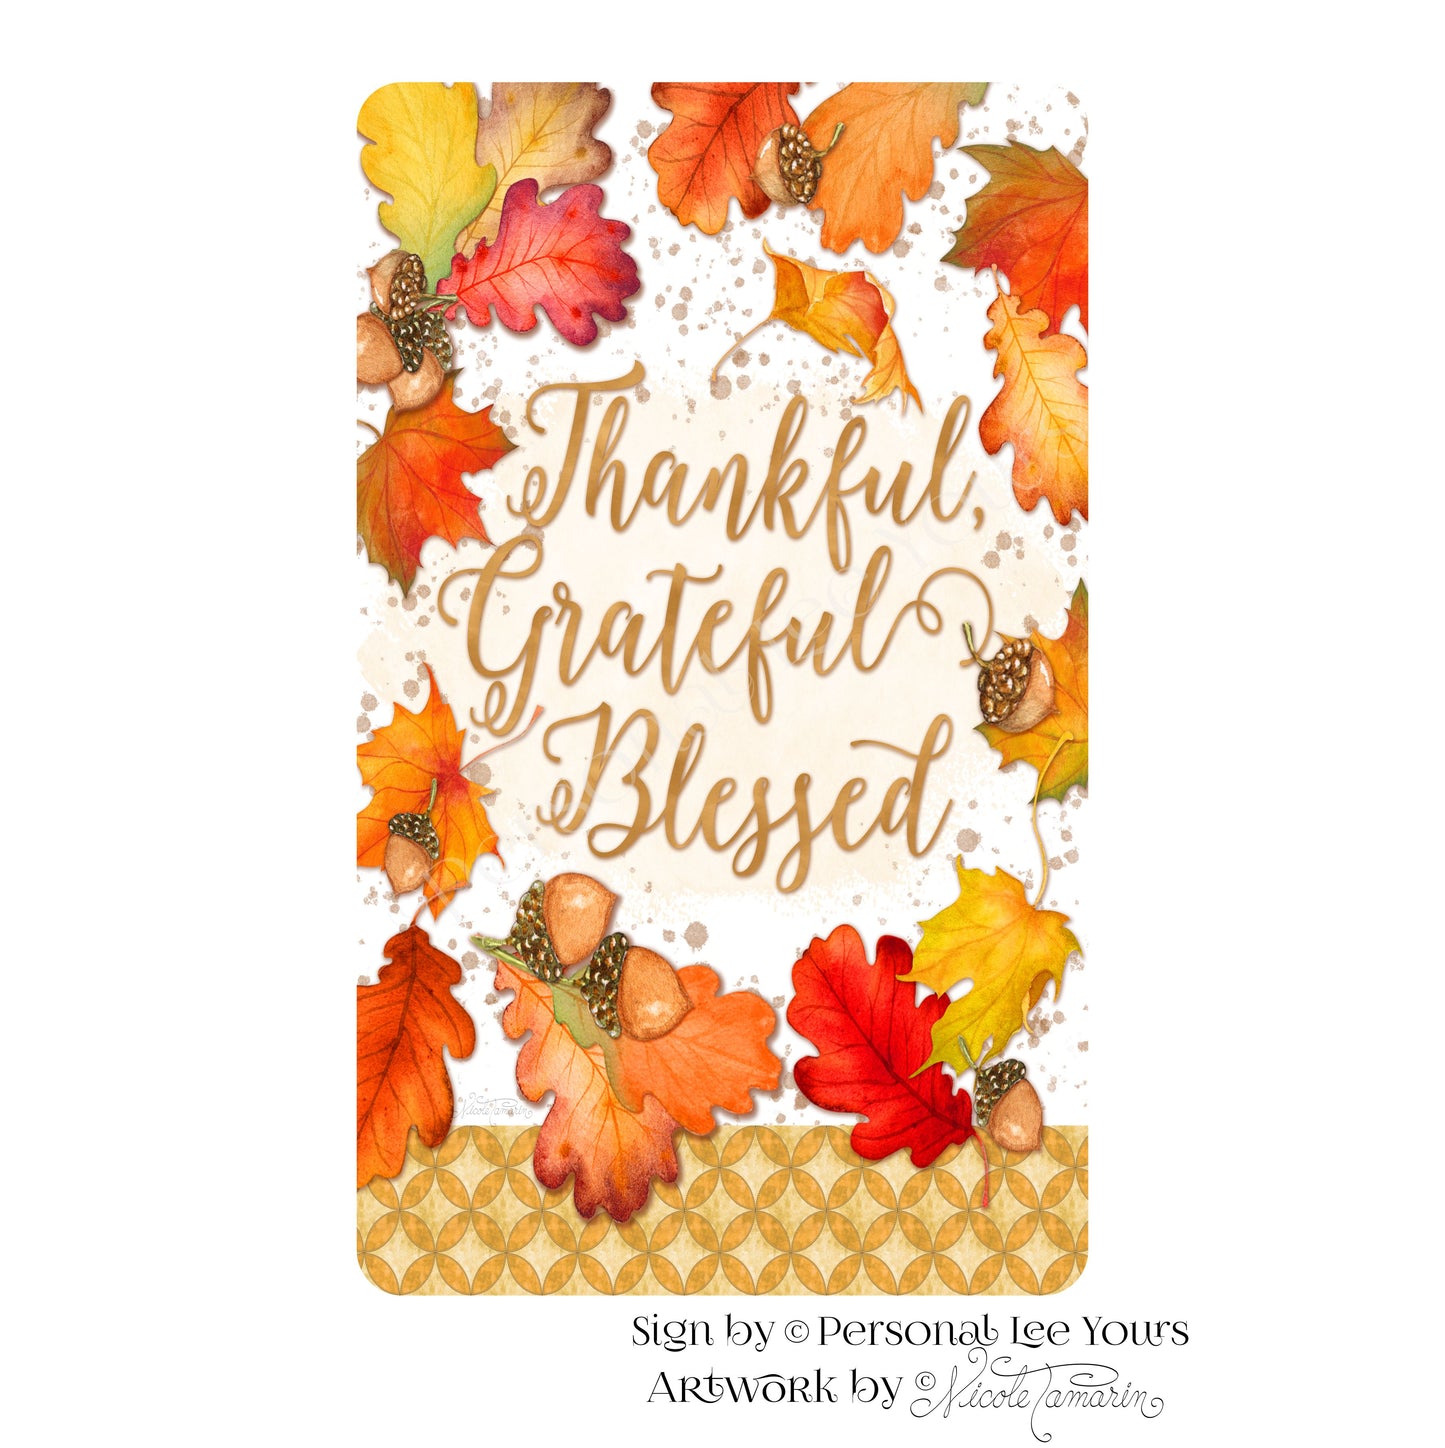 Nicole Tamarin Exclusive Sign * Falling Leaves, Thankful, Grateful, Blessed * Vertical * 4 Sizes * Lightweight Metal